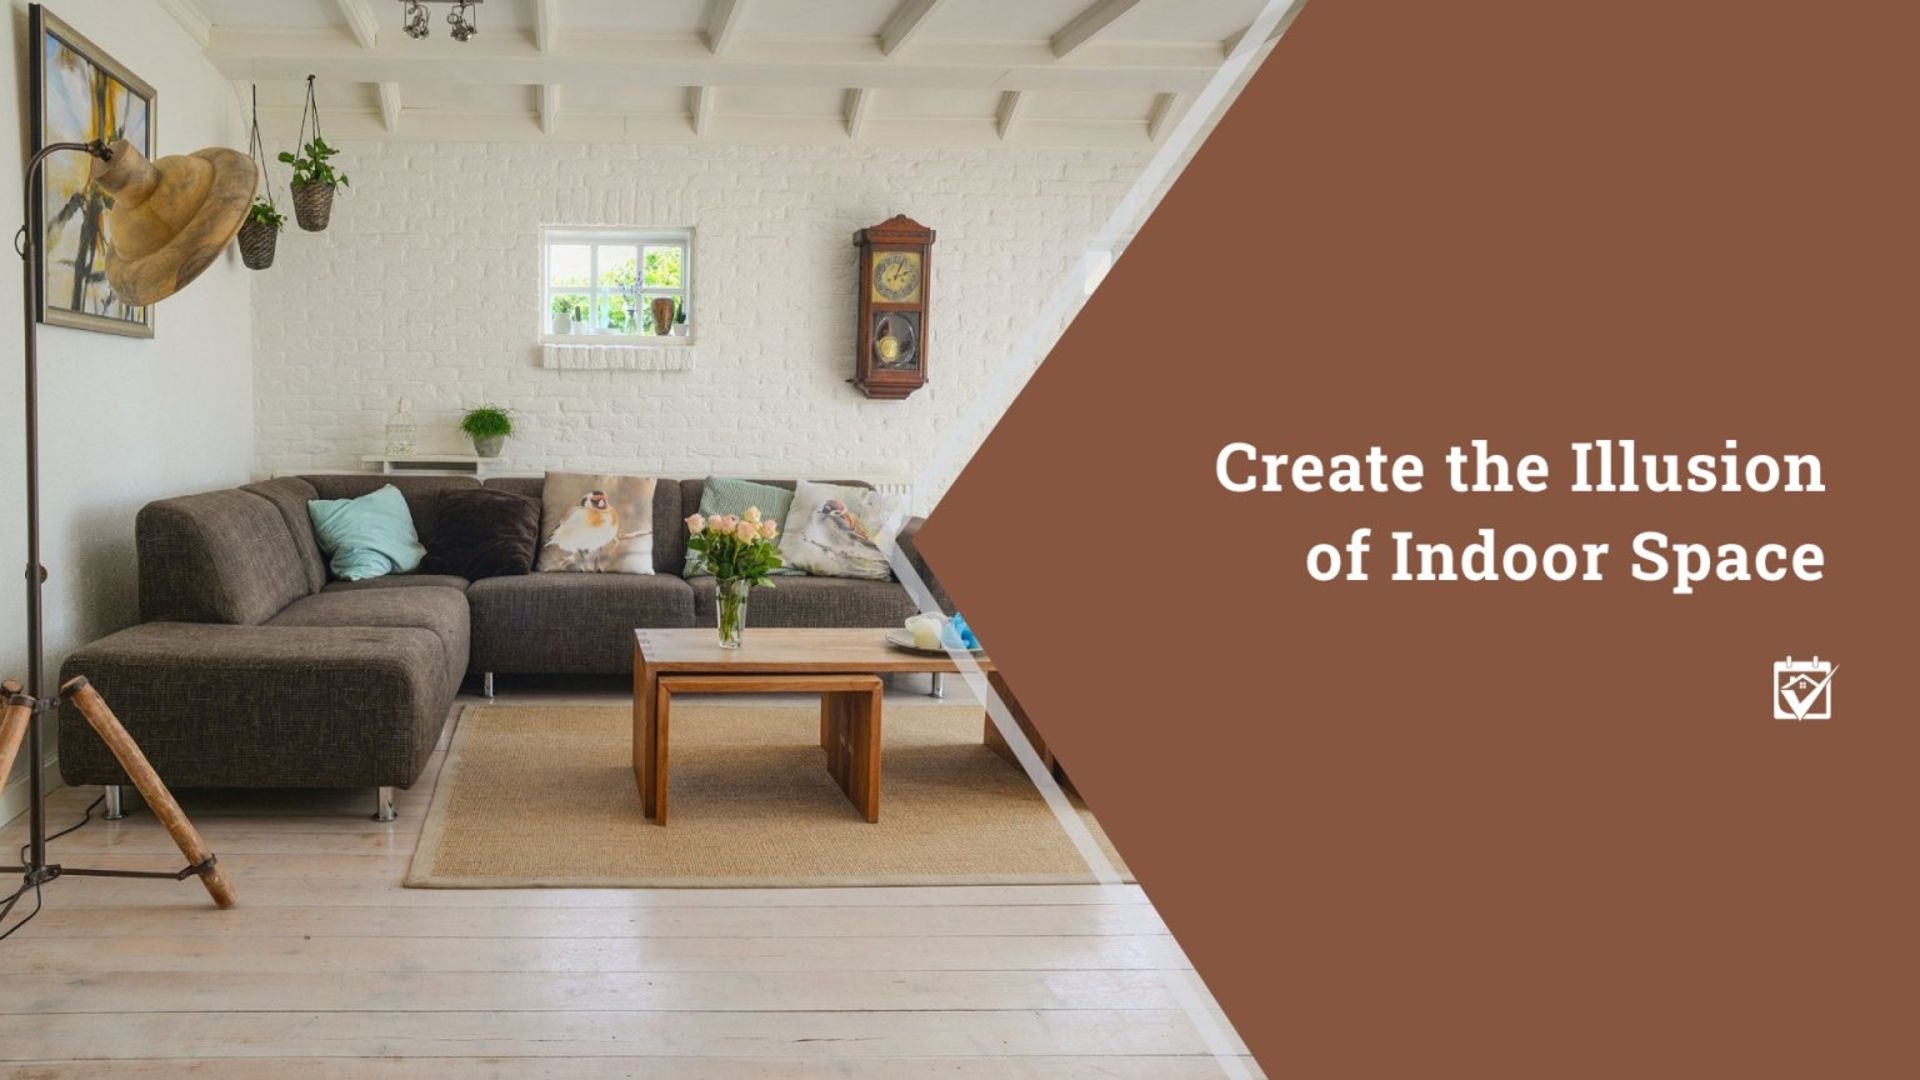 Create the Illusion of Indoor Space